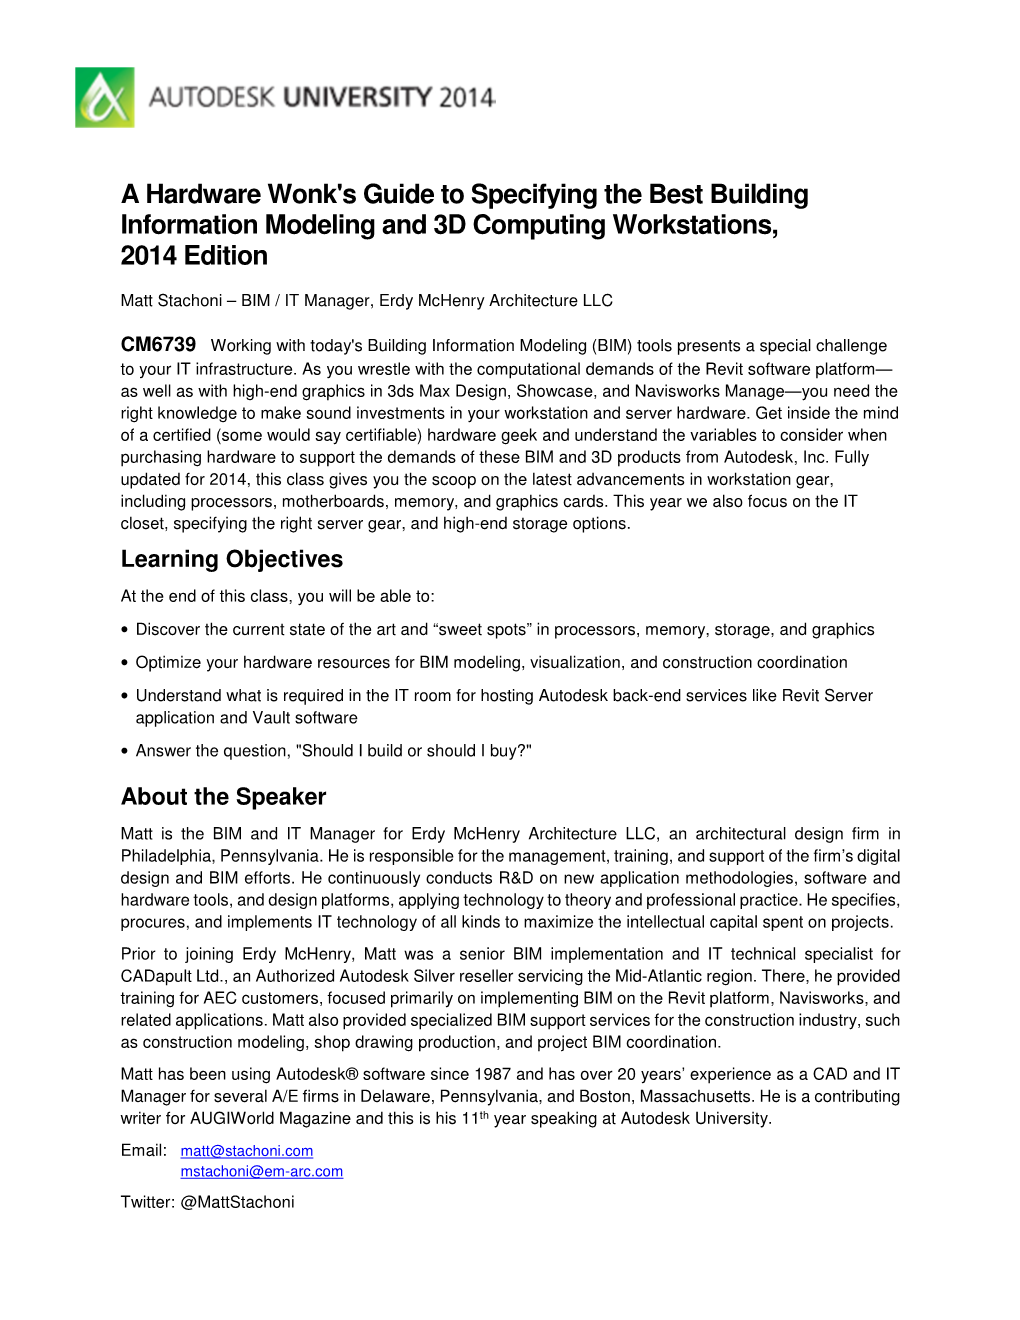 A Hardware Wonk's Guide to Specifying the Best Building Information Modeling and 3D Computing Workstations, 2014 Edition